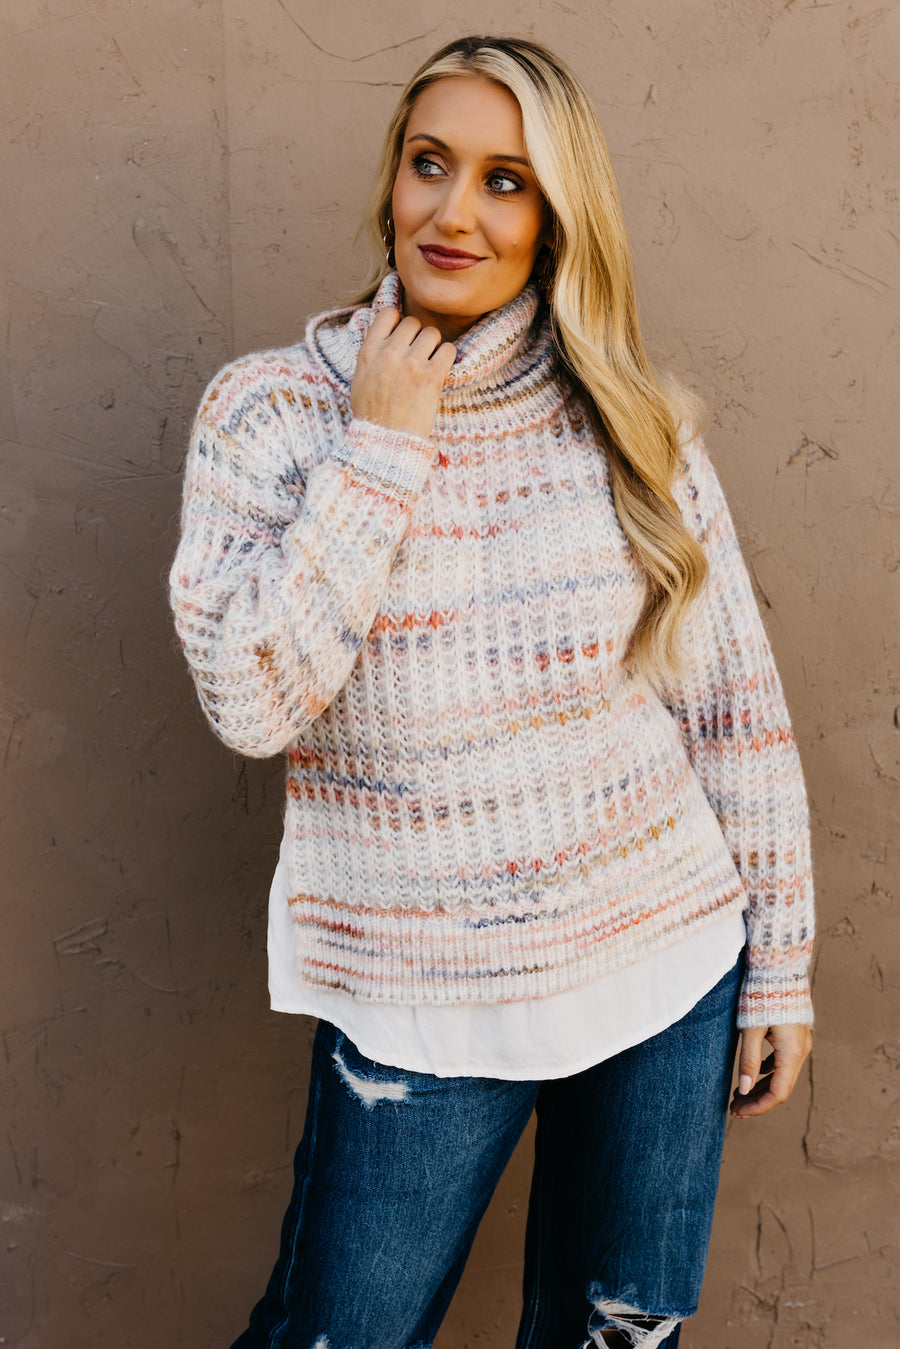 The Ivy Mixed Media Cowl Neck Sweater  - FINAL SALE